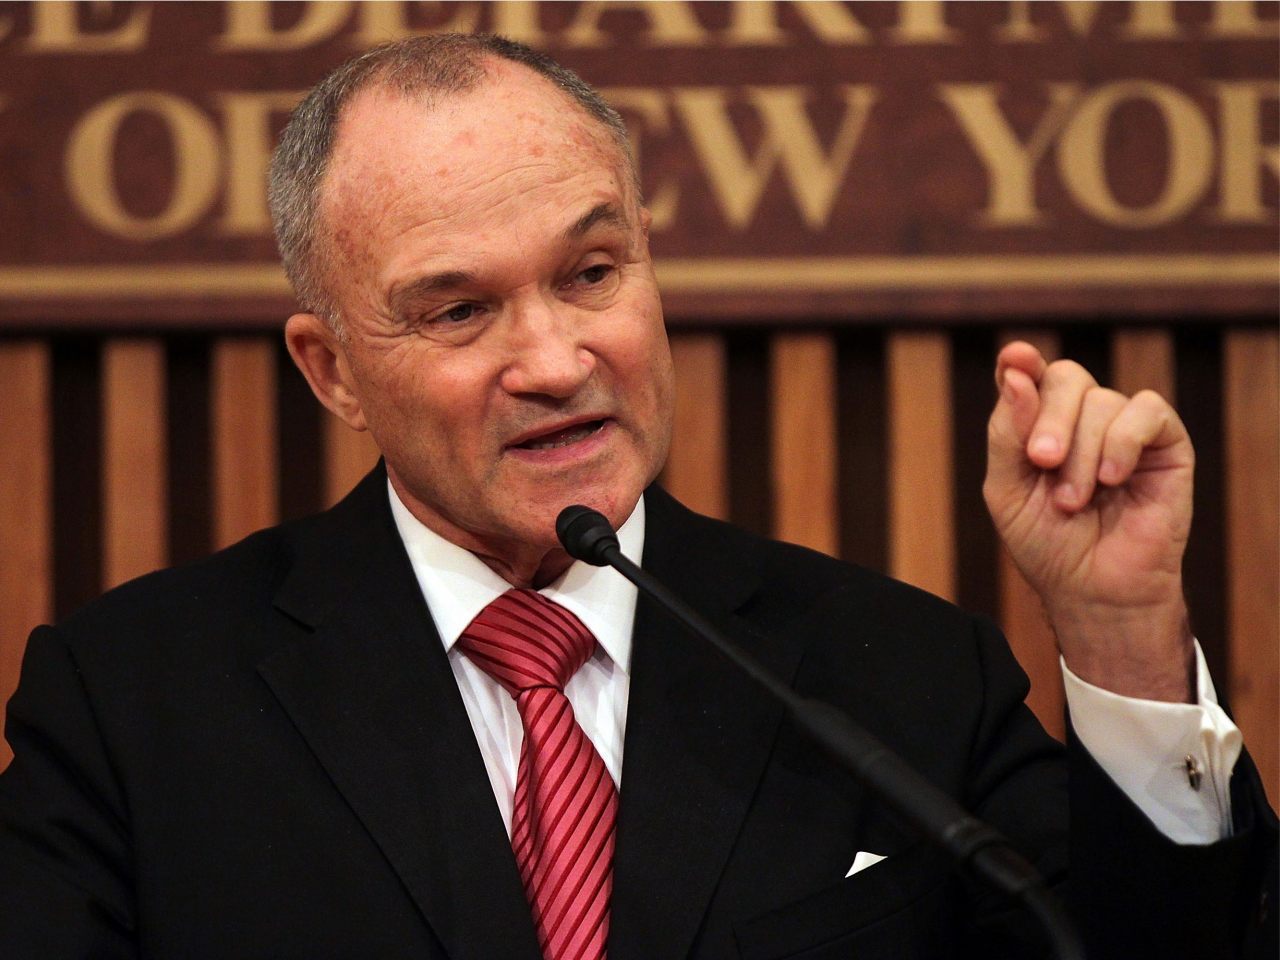 Former Nypd Commish Ray Kelly Were Going To See More Attacks Like San Bernardino Breitbart